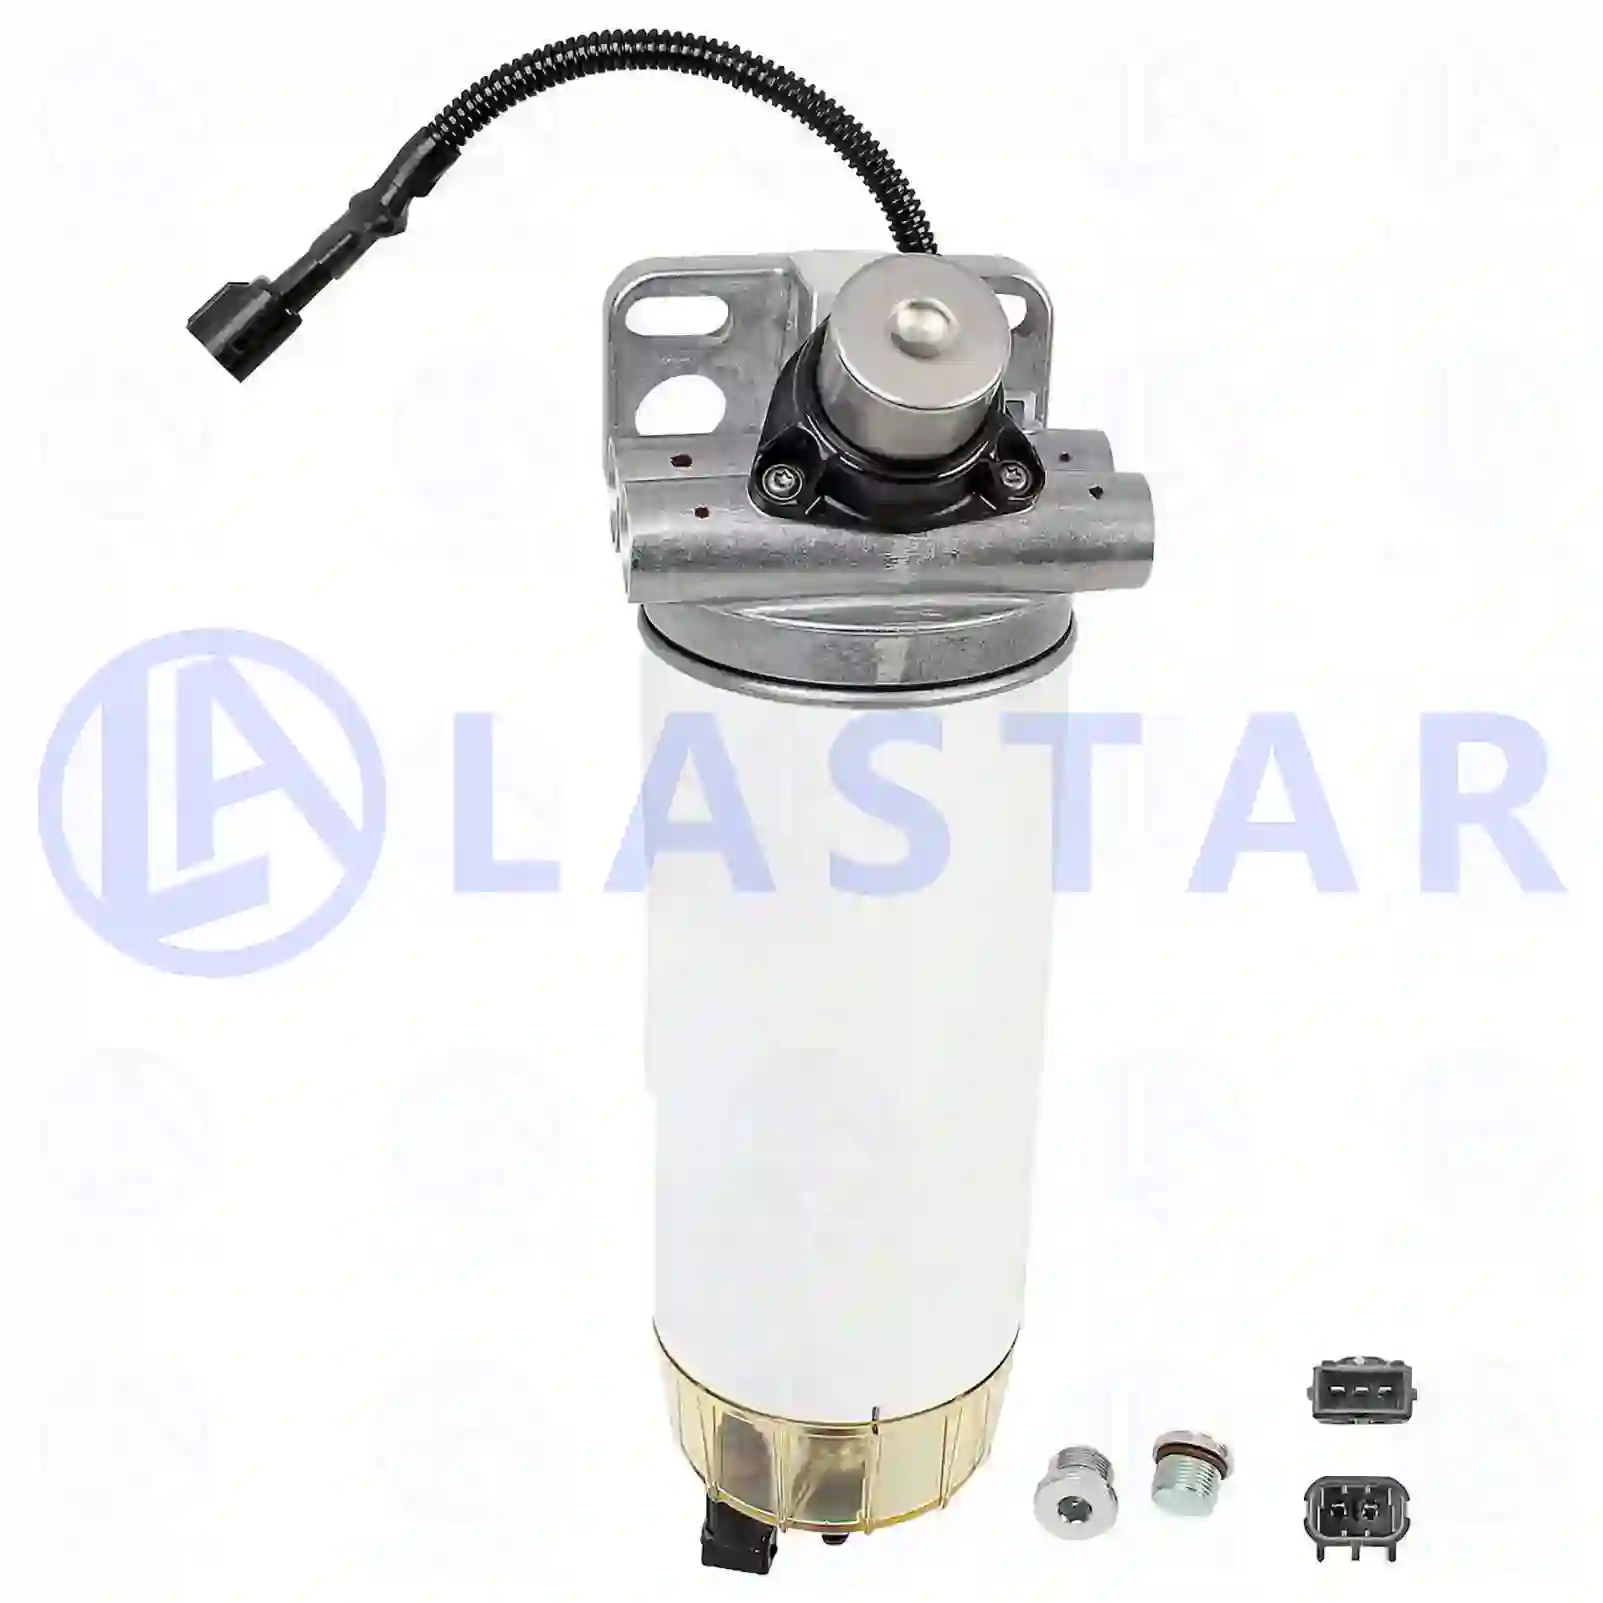 Fuel filter, complete, 77724303, 5801510519 ||  77724303 Lastar Spare Part | Truck Spare Parts, Auotomotive Spare Parts Fuel filter, complete, 77724303, 5801510519 ||  77724303 Lastar Spare Part | Truck Spare Parts, Auotomotive Spare Parts